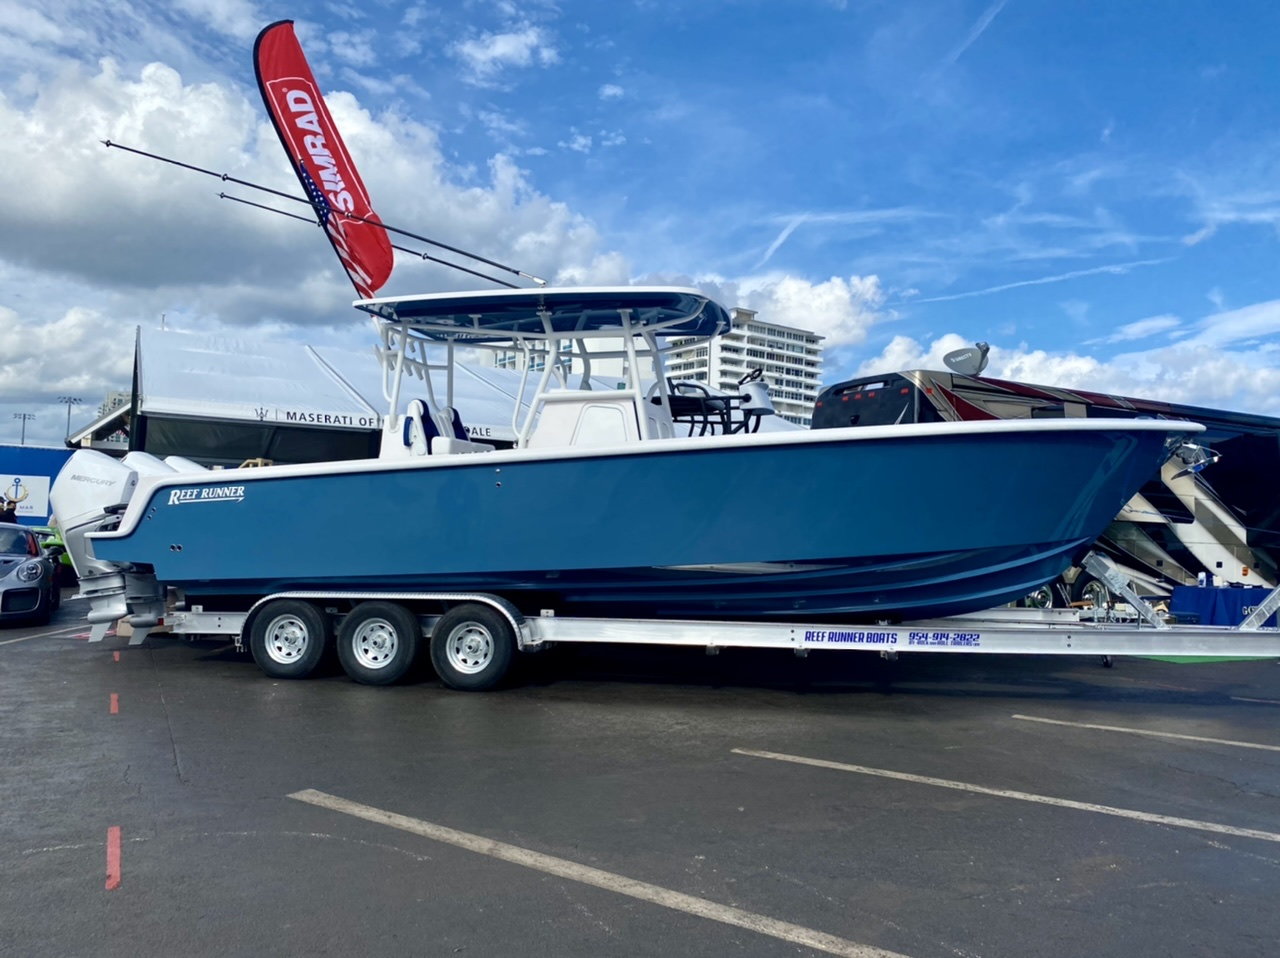 2022 Reef Runner 340 Fully Loaded Available for Delivery - The